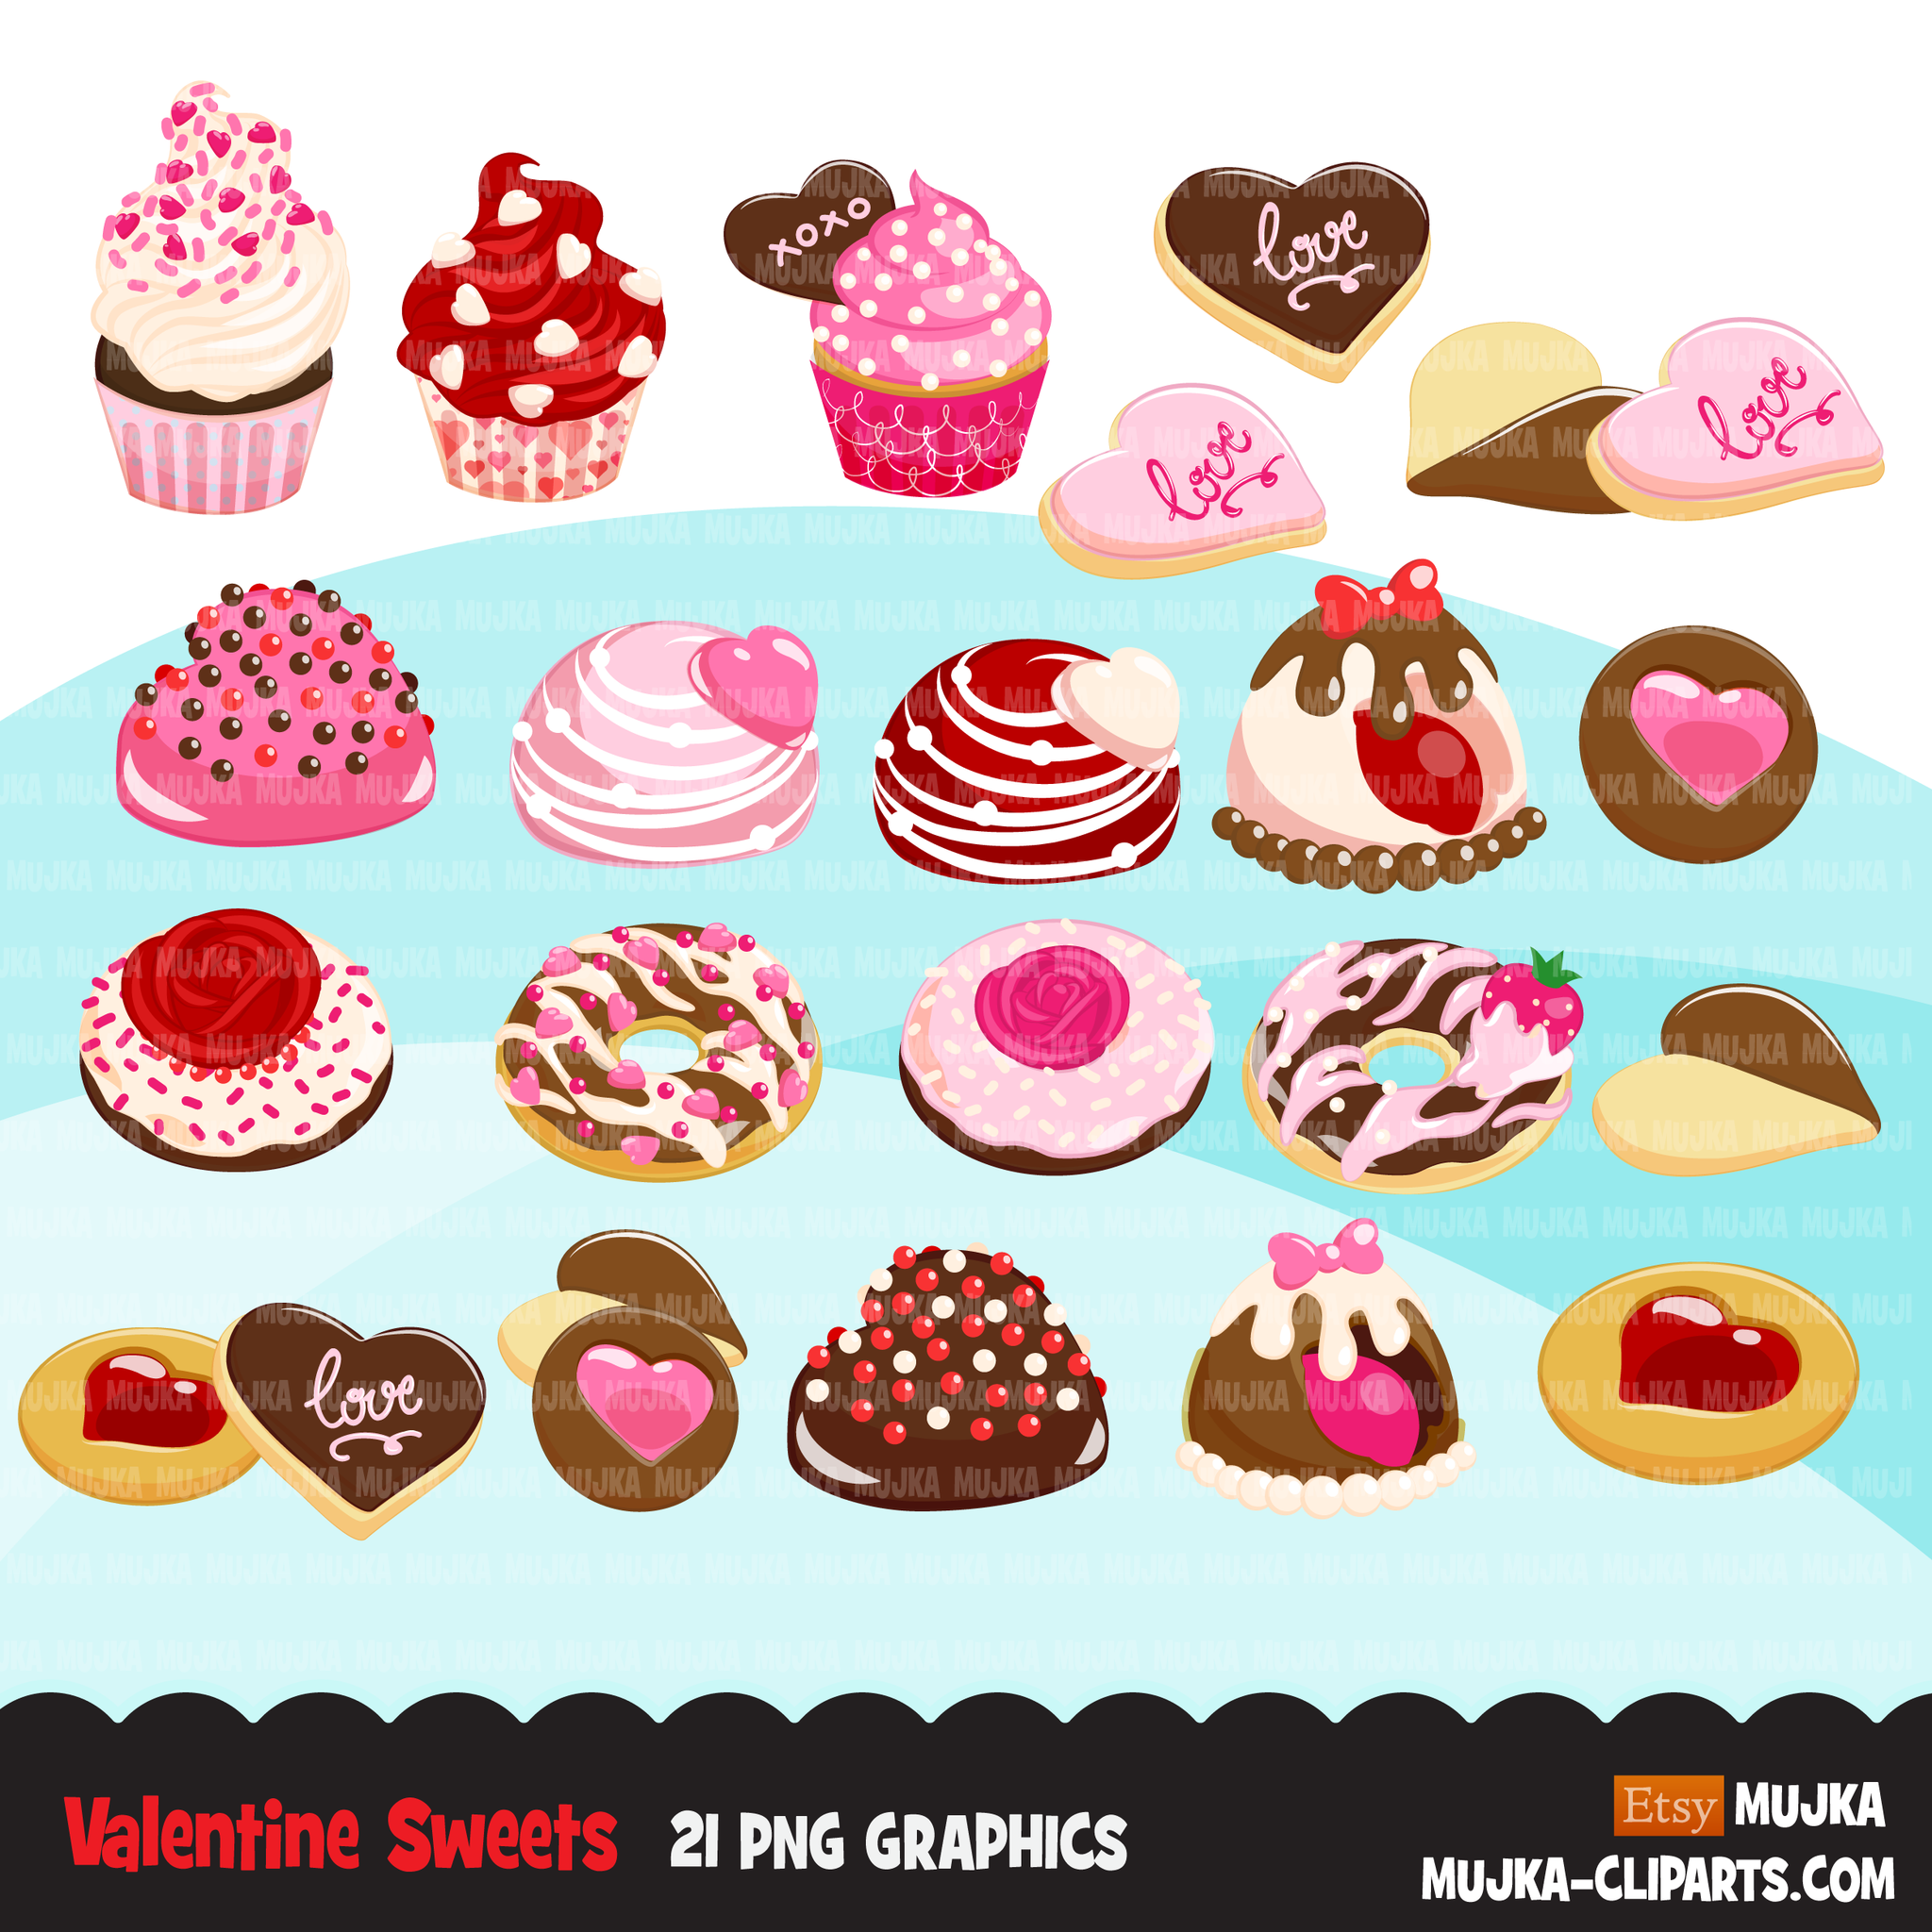 Candy land Clipart Bundle, Sweets, ice cream, donuts, chocolate, cupcakes, backgrounds, tutu girl graphics commercial use PNG clip art